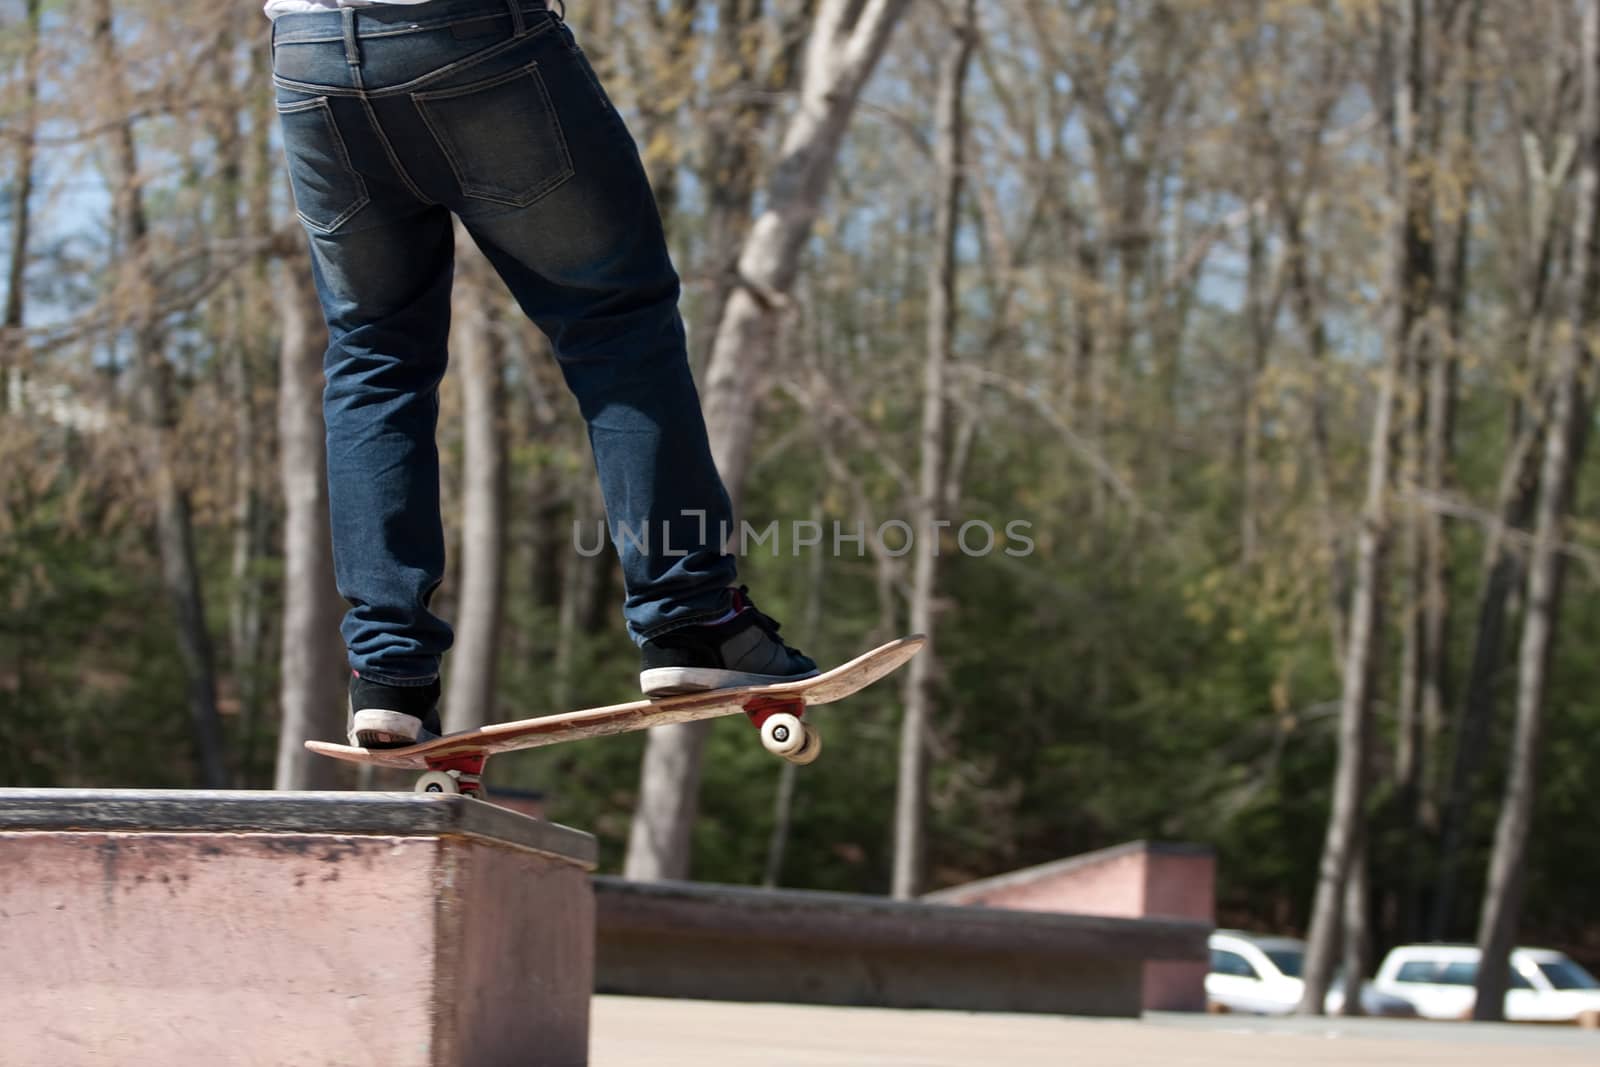 Skateboarder on a Grind Rail by graficallyminded